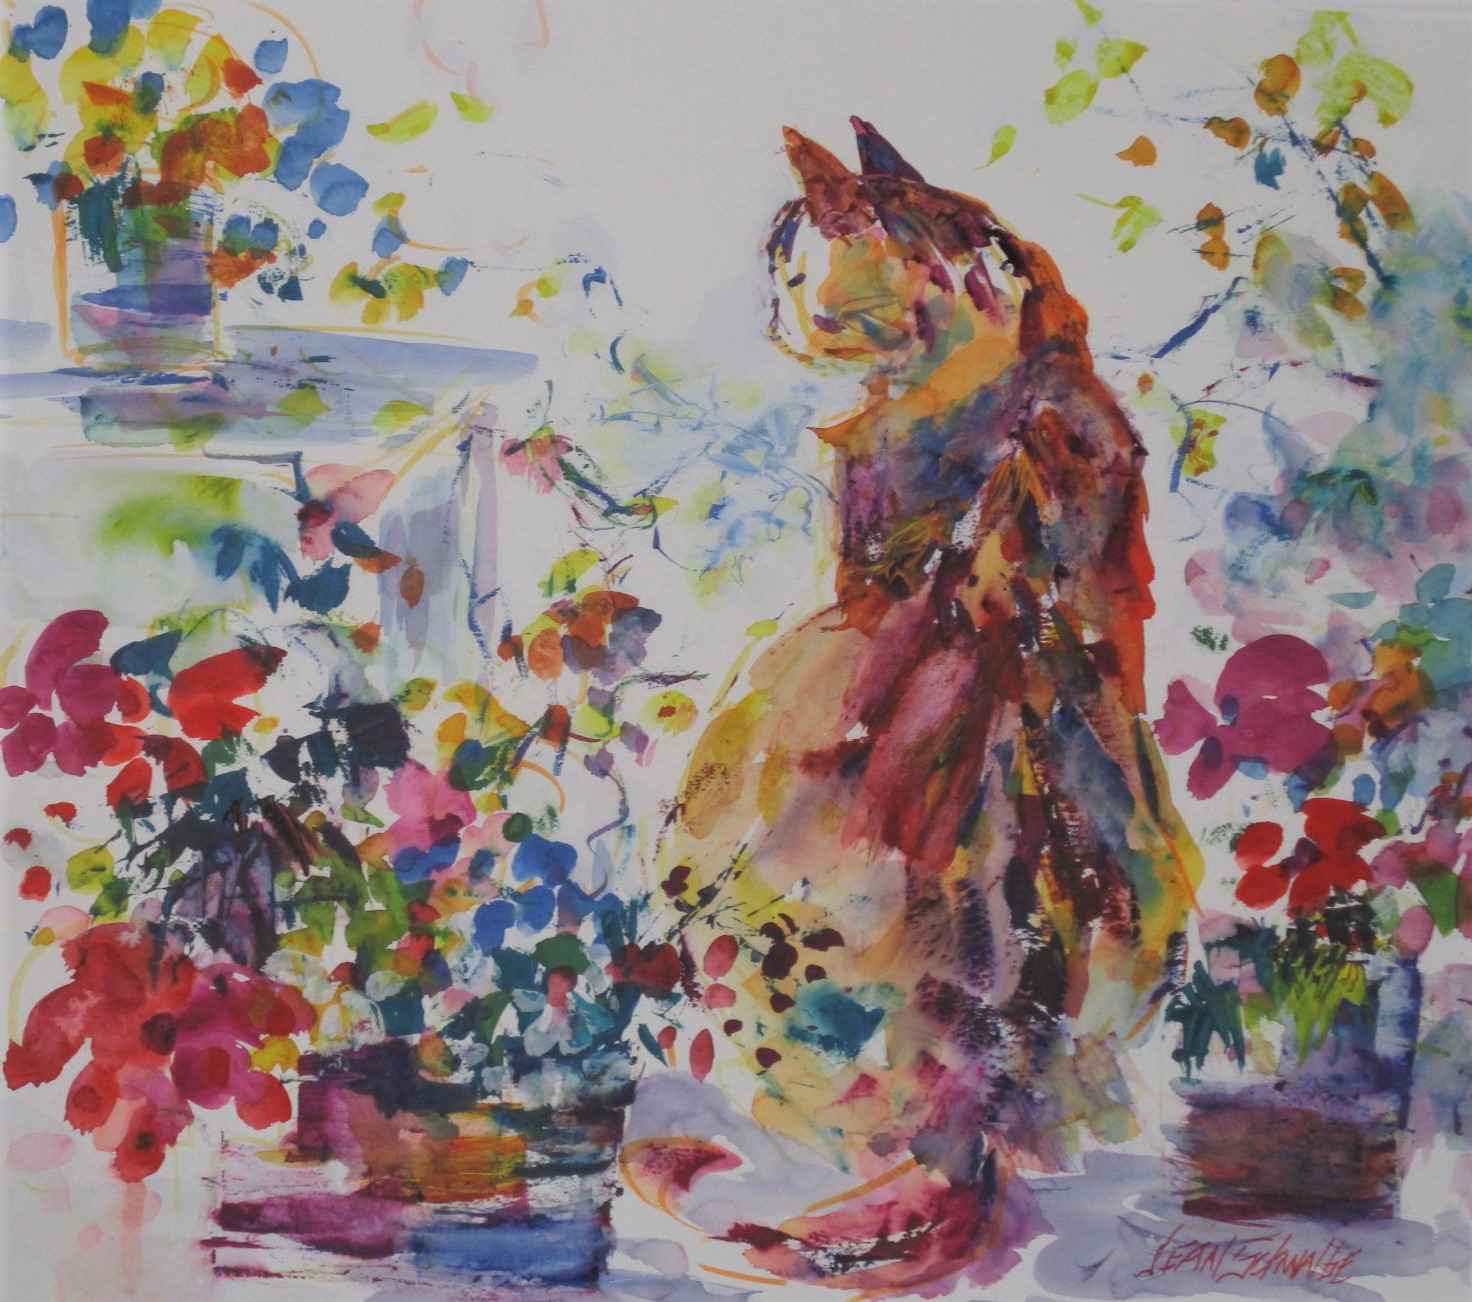 Cat and Flowers by  Jean Schwalbe - Masterpiece Online